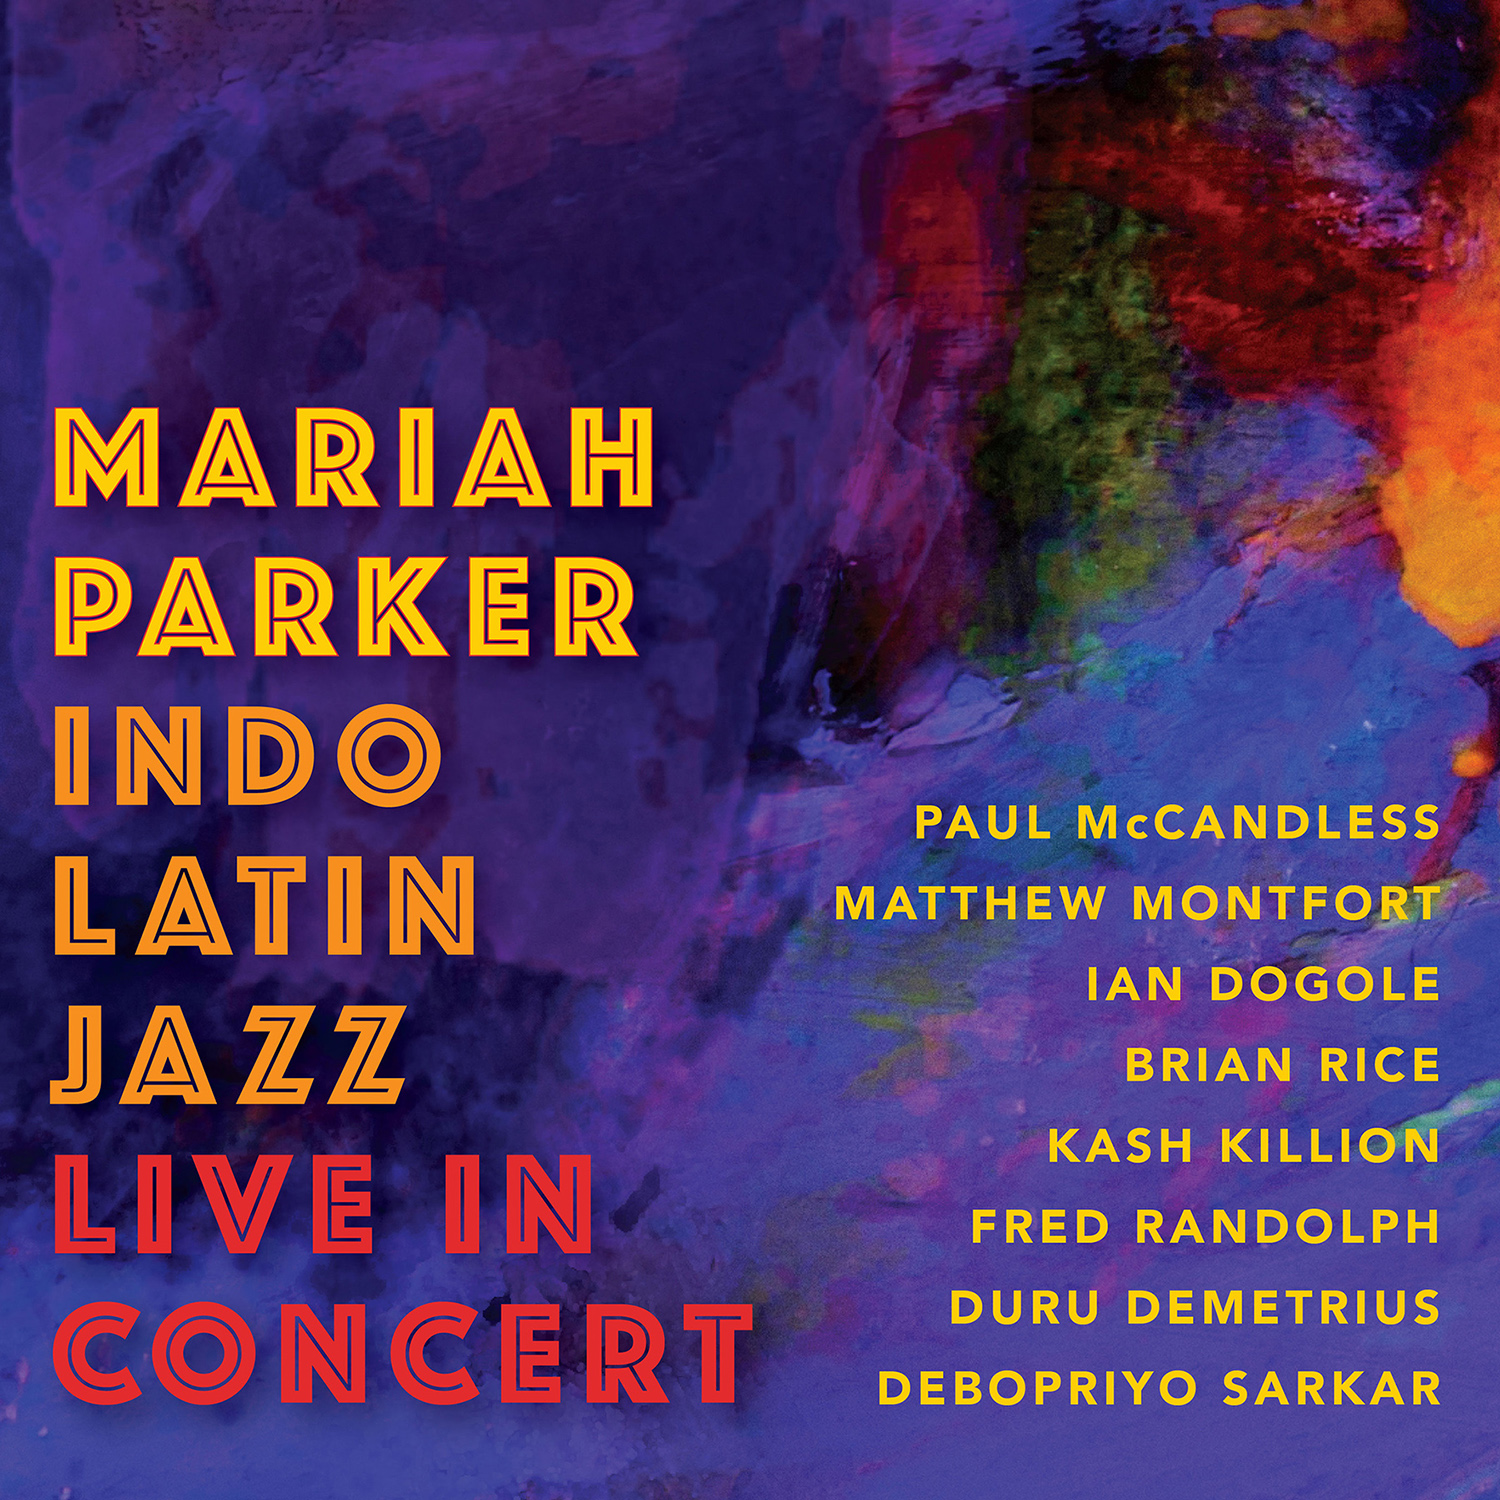 Latin Jazz Live in Concert by Mariah Parker